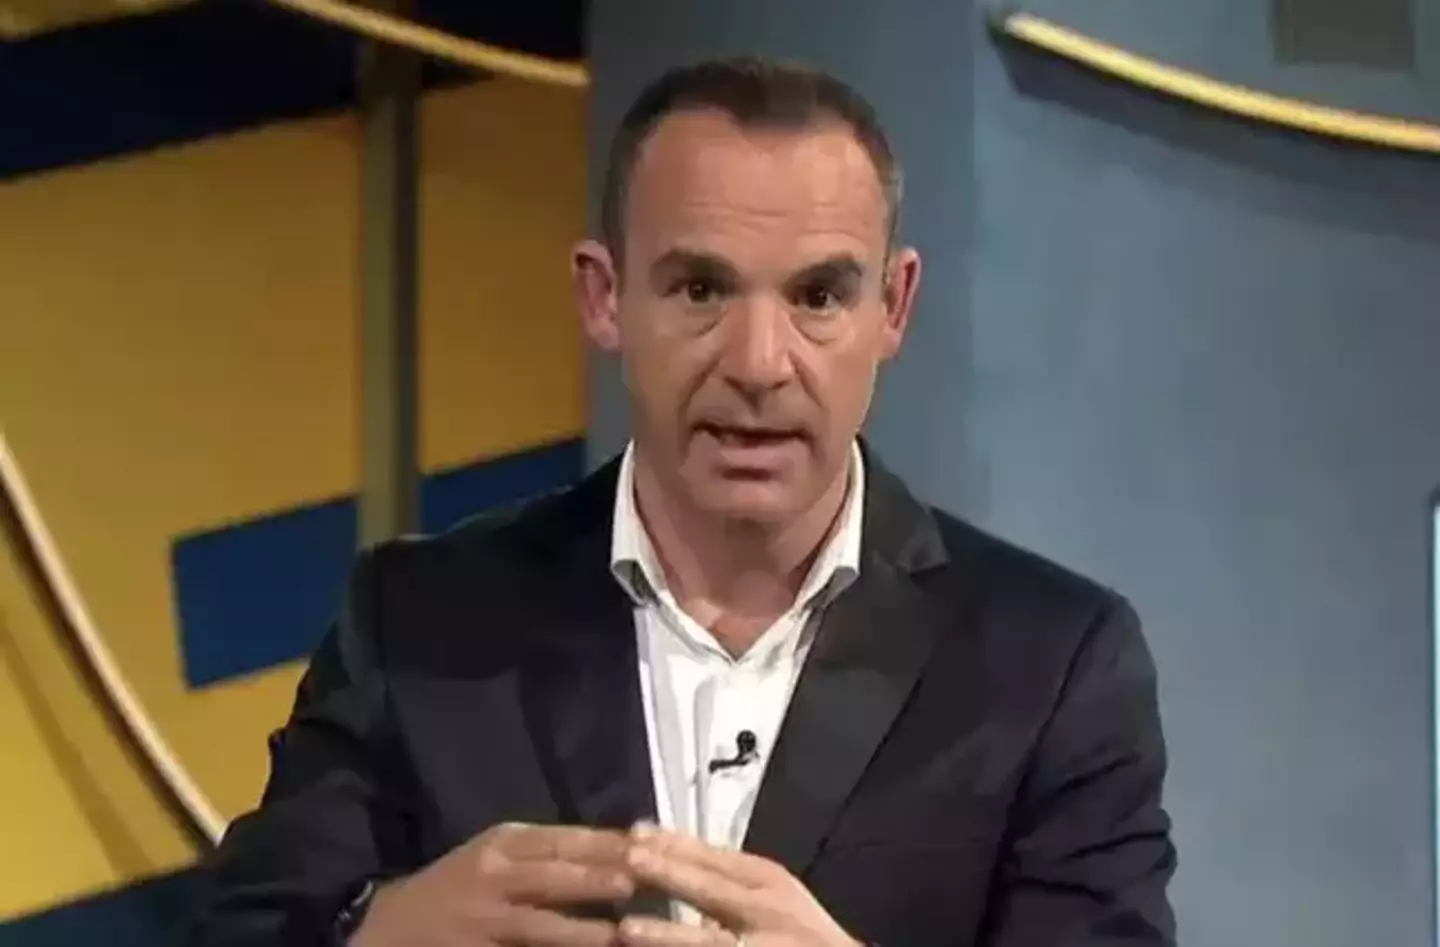 Martin Lewis warned Brits abroad about hidden charges which could soon stack up.